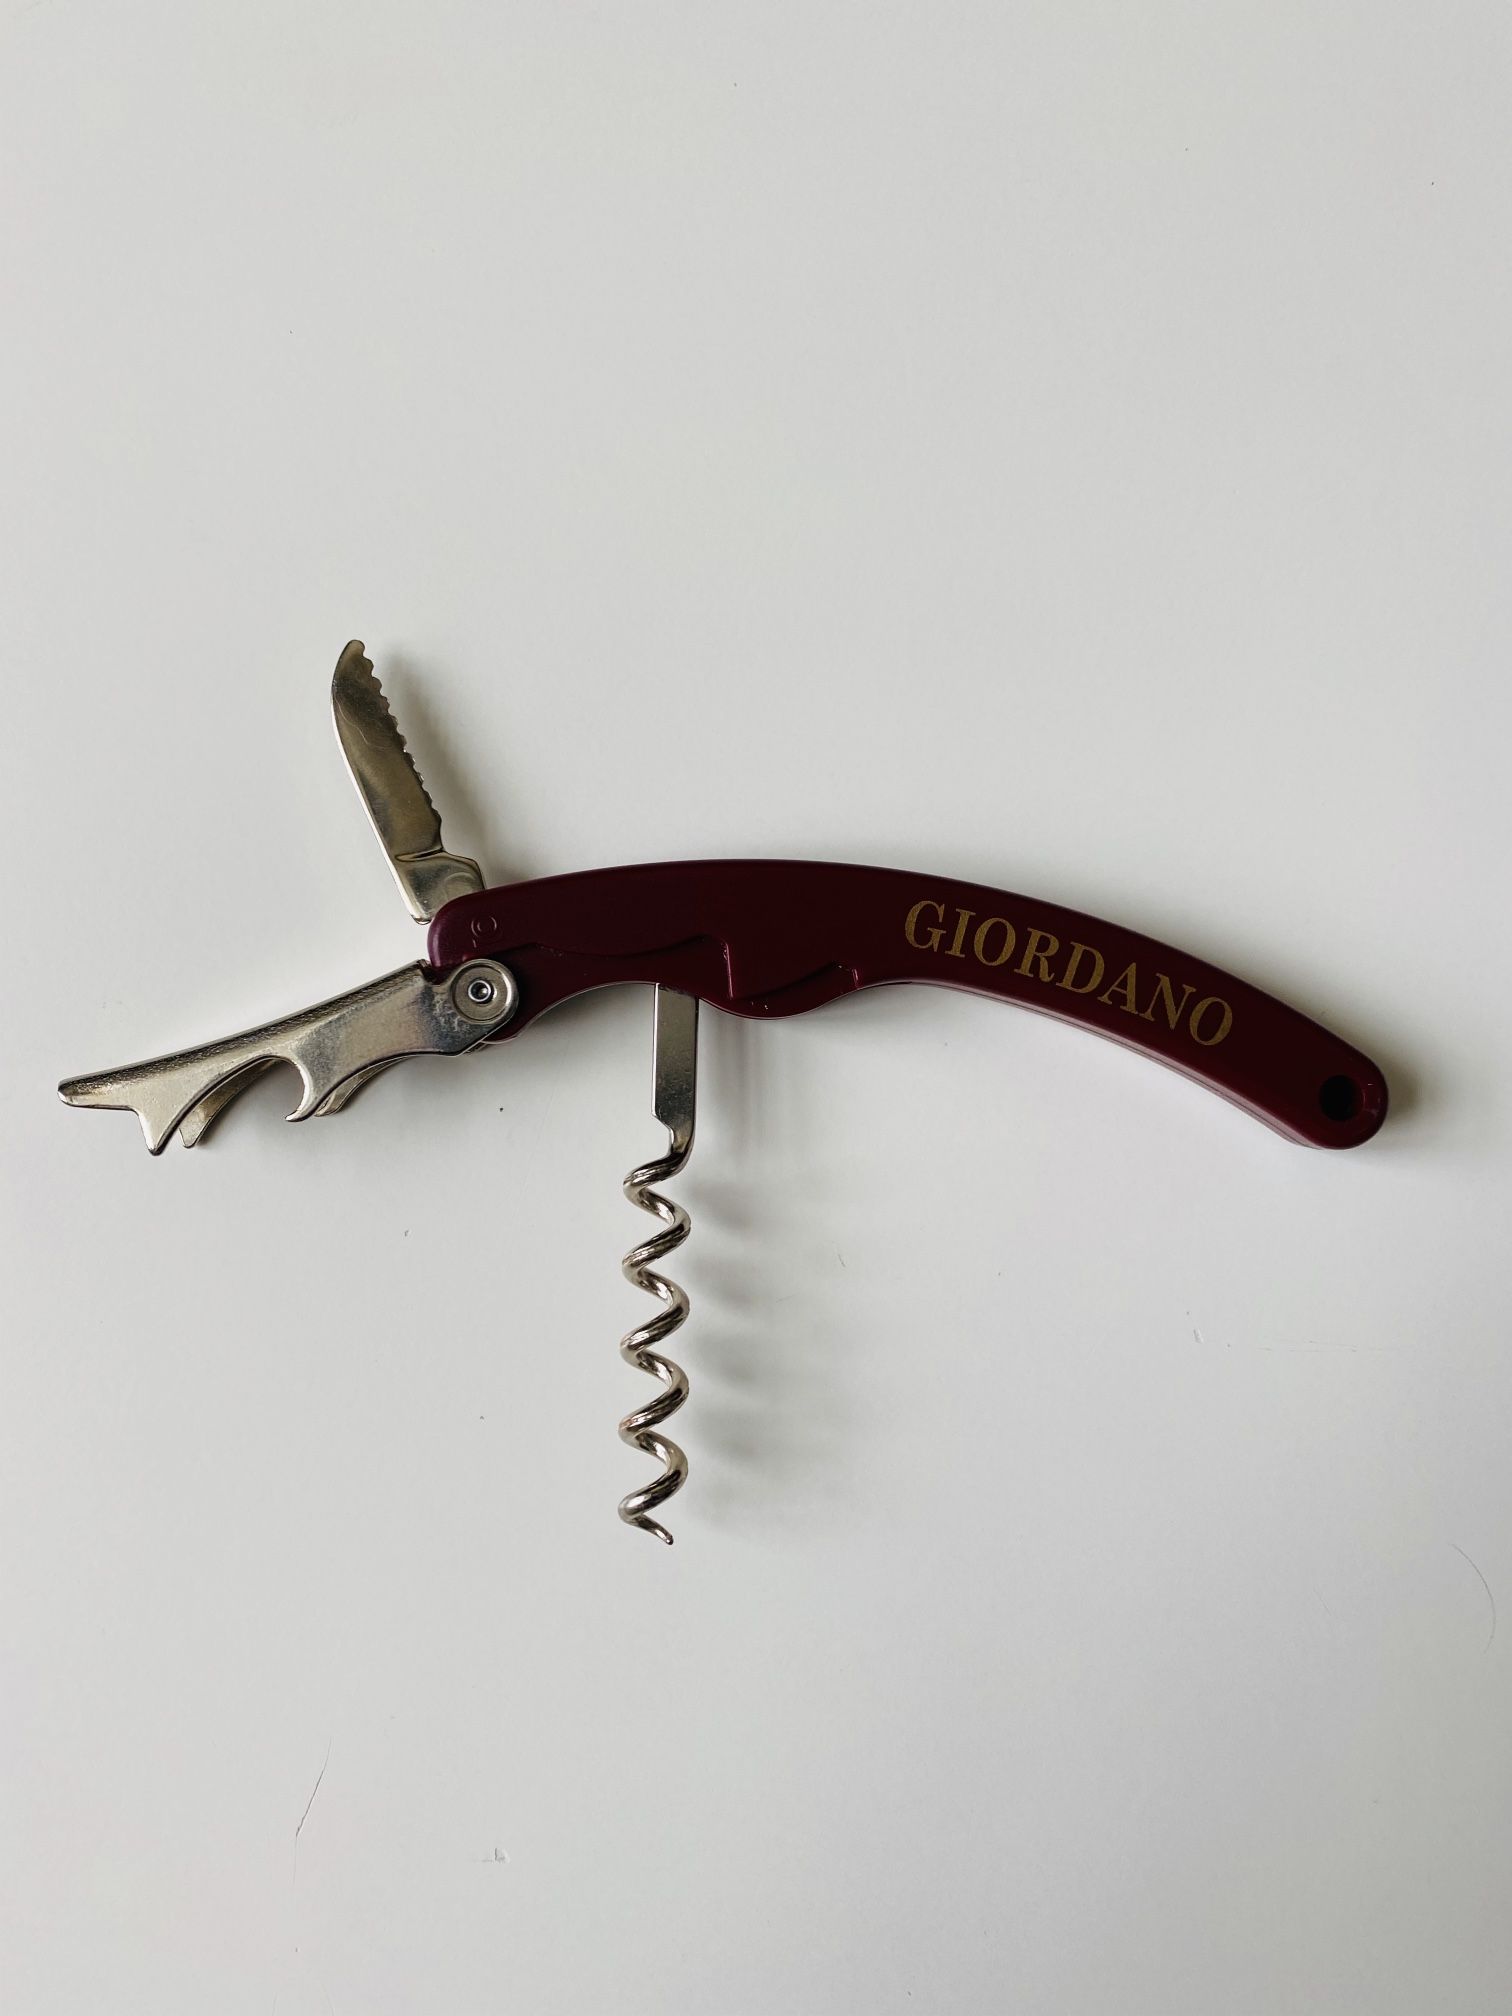 Famous Giordano Stainless Corkscrew-Bottle Opener. New. Never used. Very efficient do-it-all 3-tool instrument. Ergonomic handle. 5-turn worm. Integra